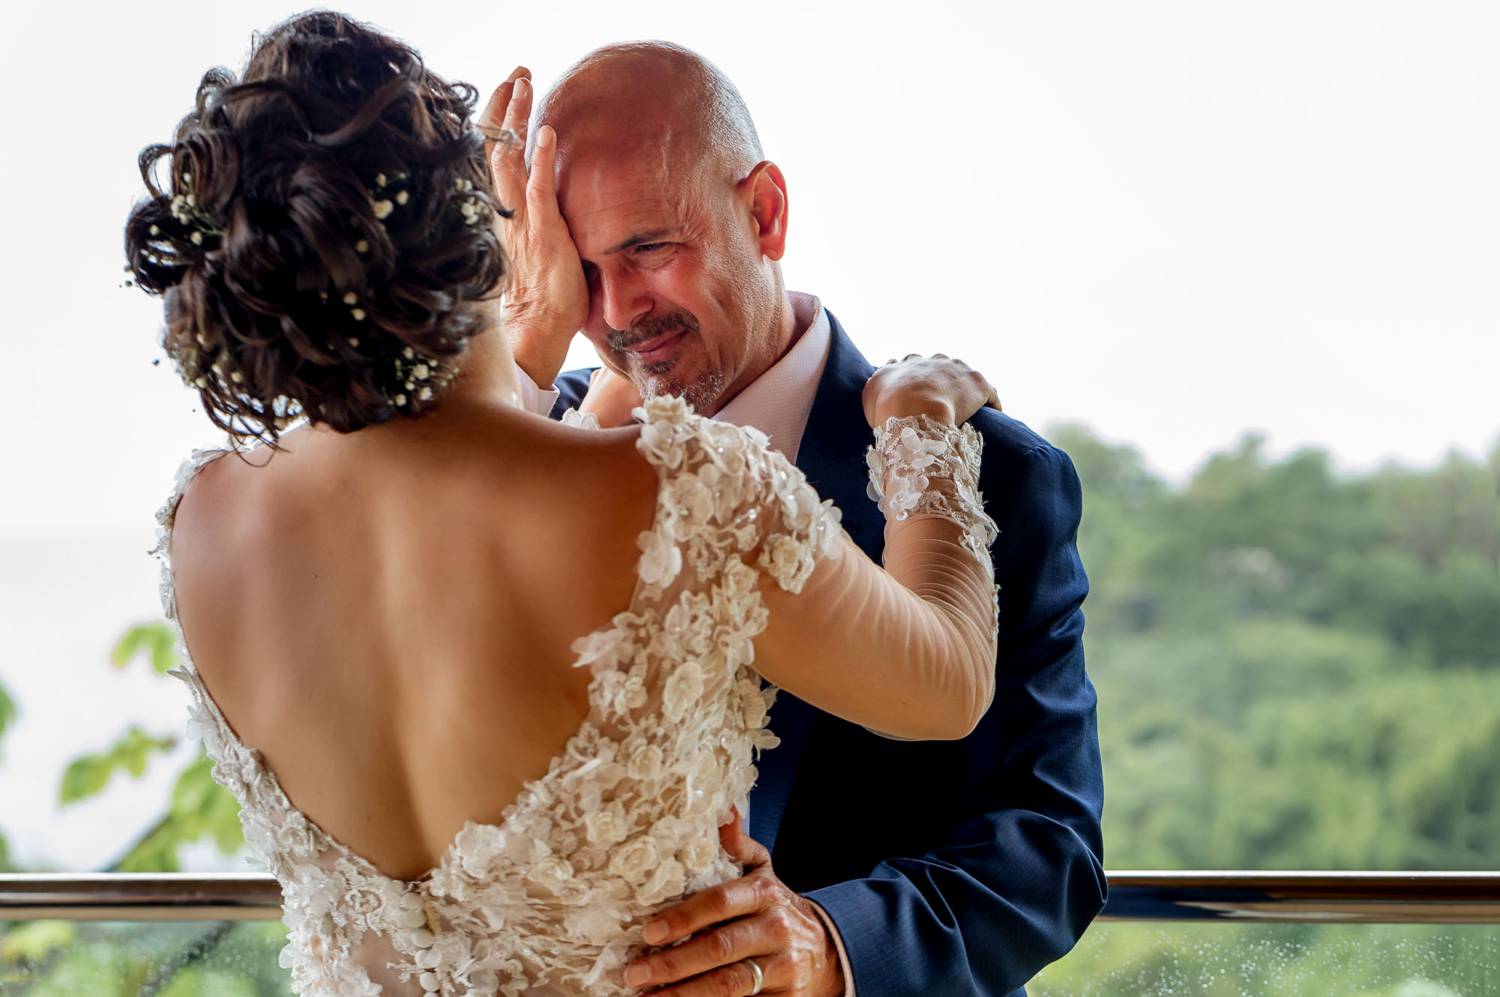 A photo by Kevin Heslin depicts a groom wiping tears away as his new wife wraps her arms around his shoulders.